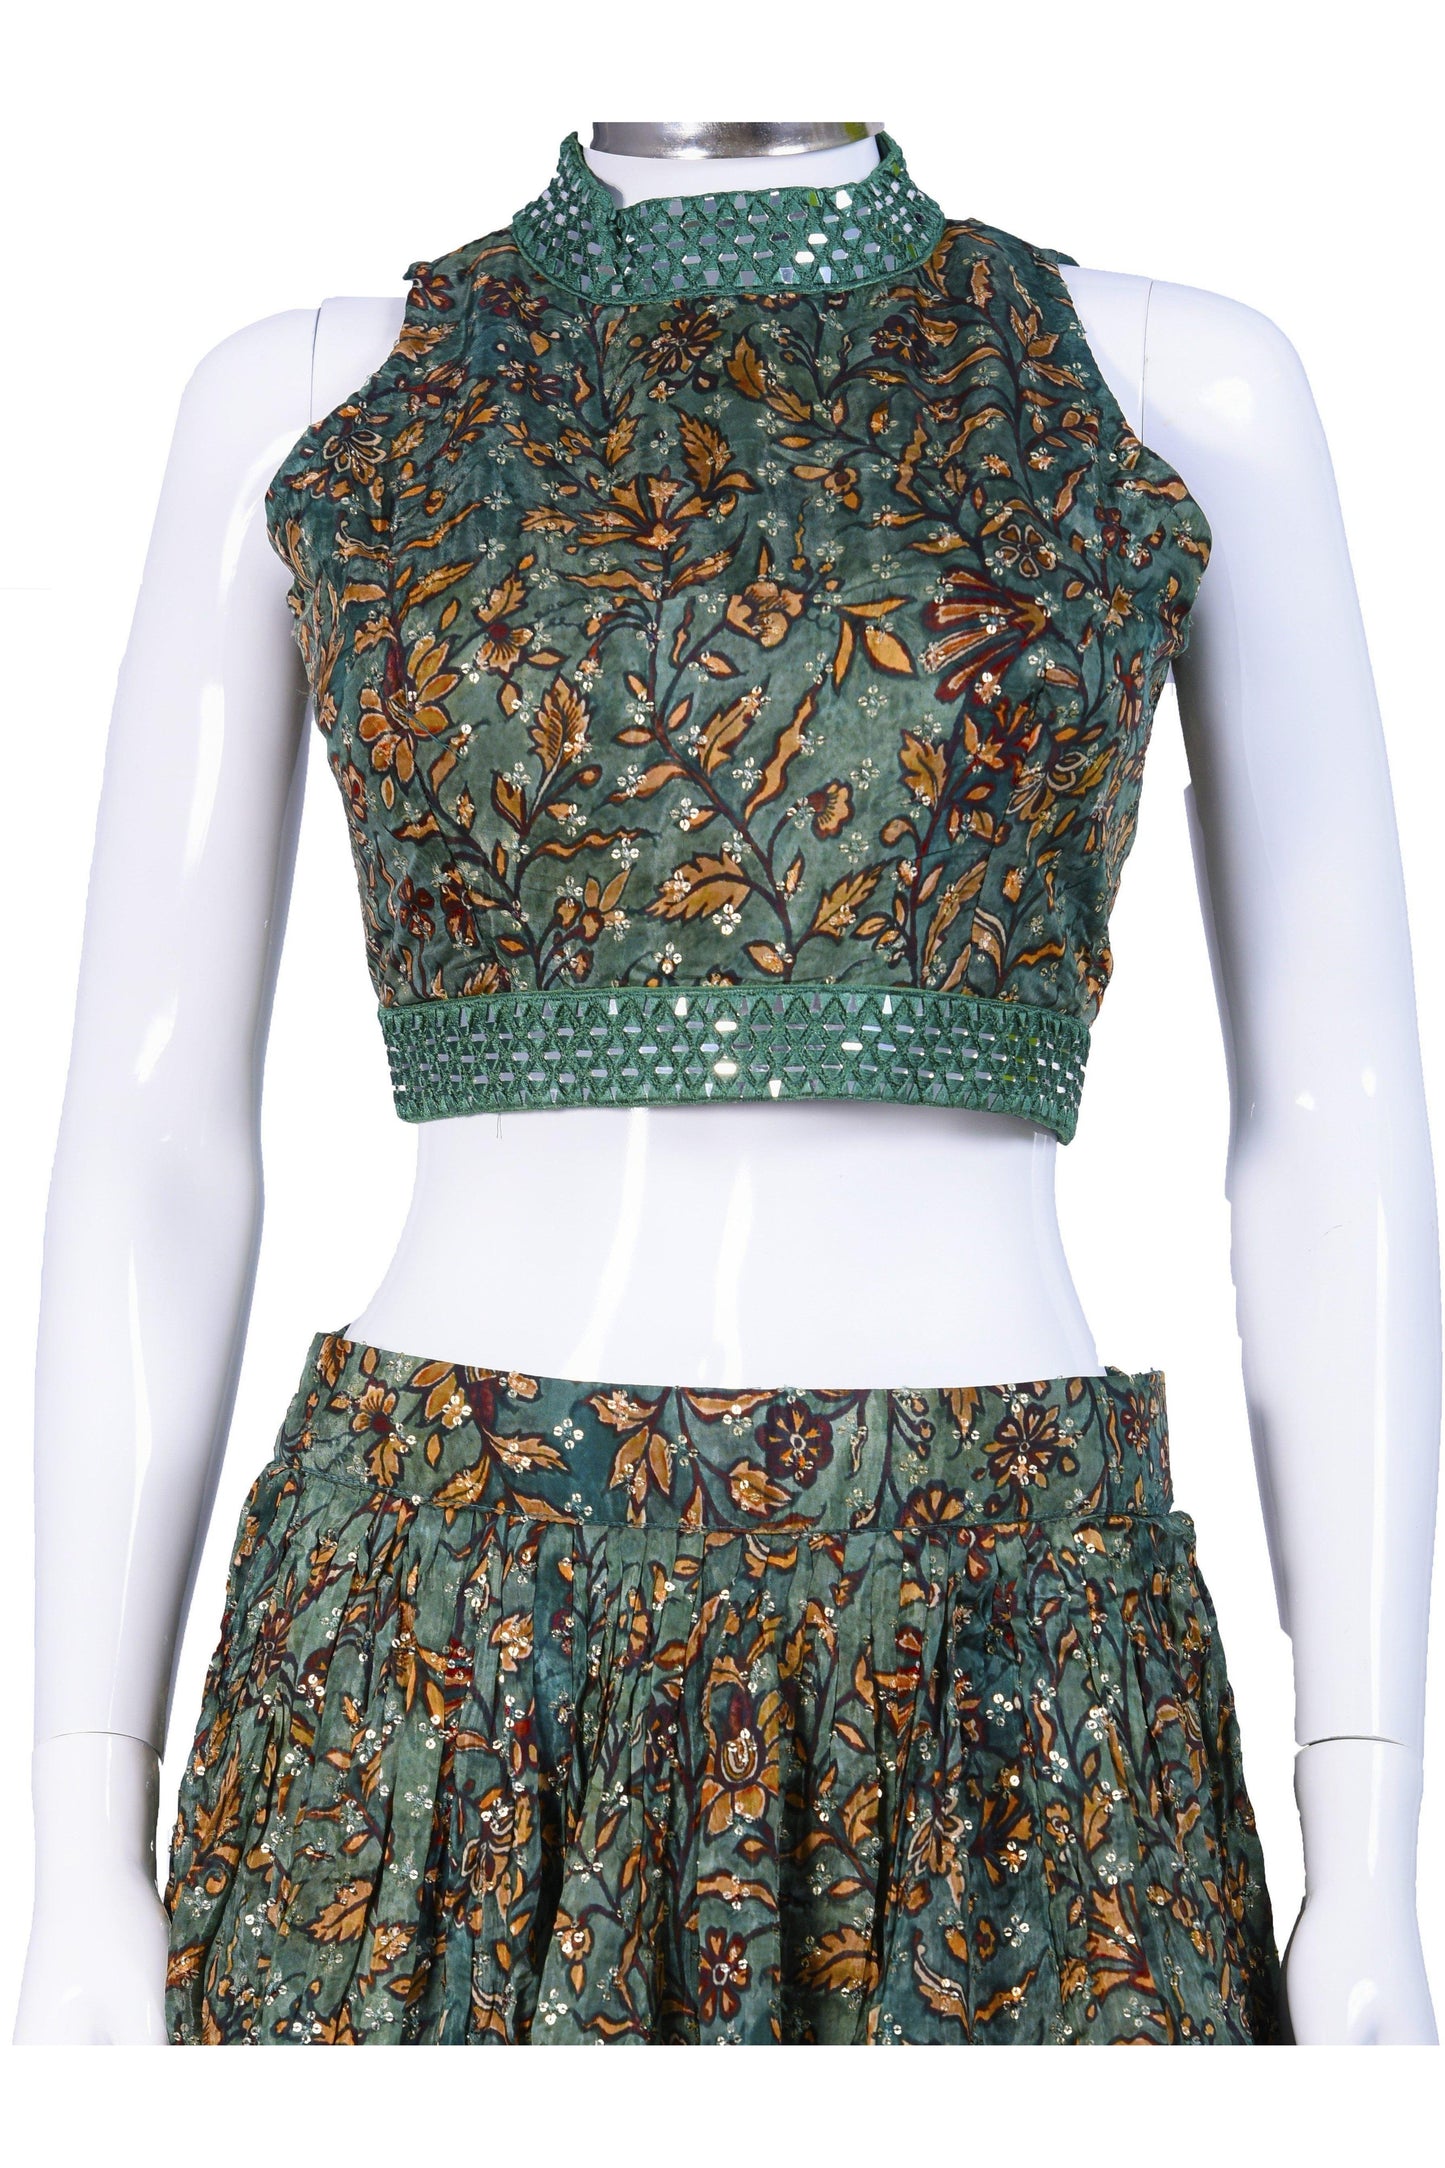 Pine Green and Red Sequin Studded Chaniya Choli-AariAmi Boutique